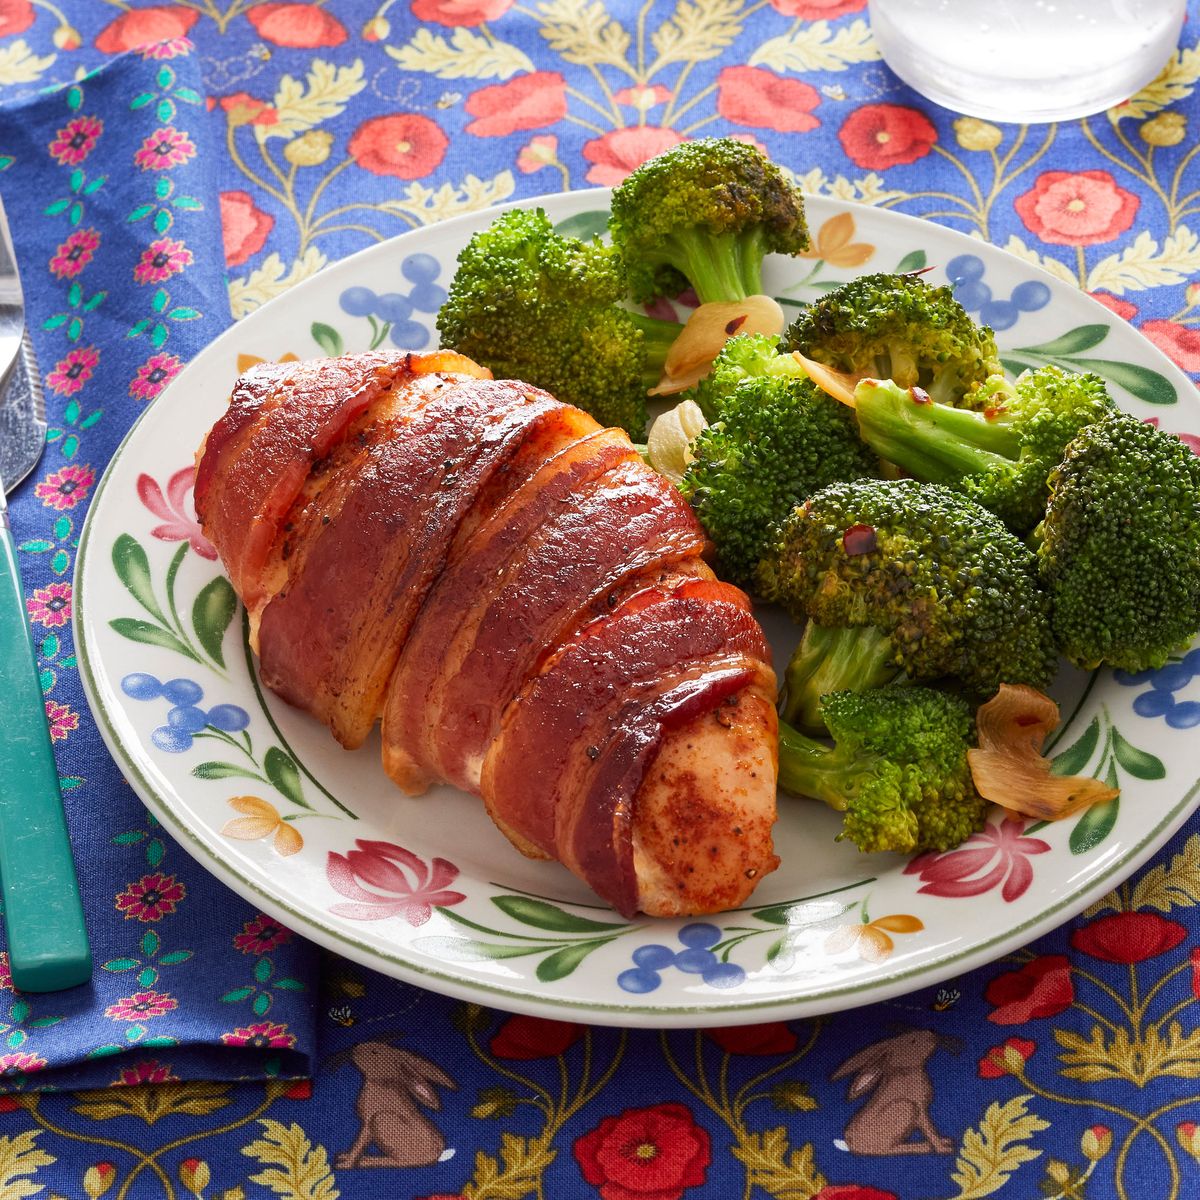 the pioneer woman's bacon wrapped chicken recipe